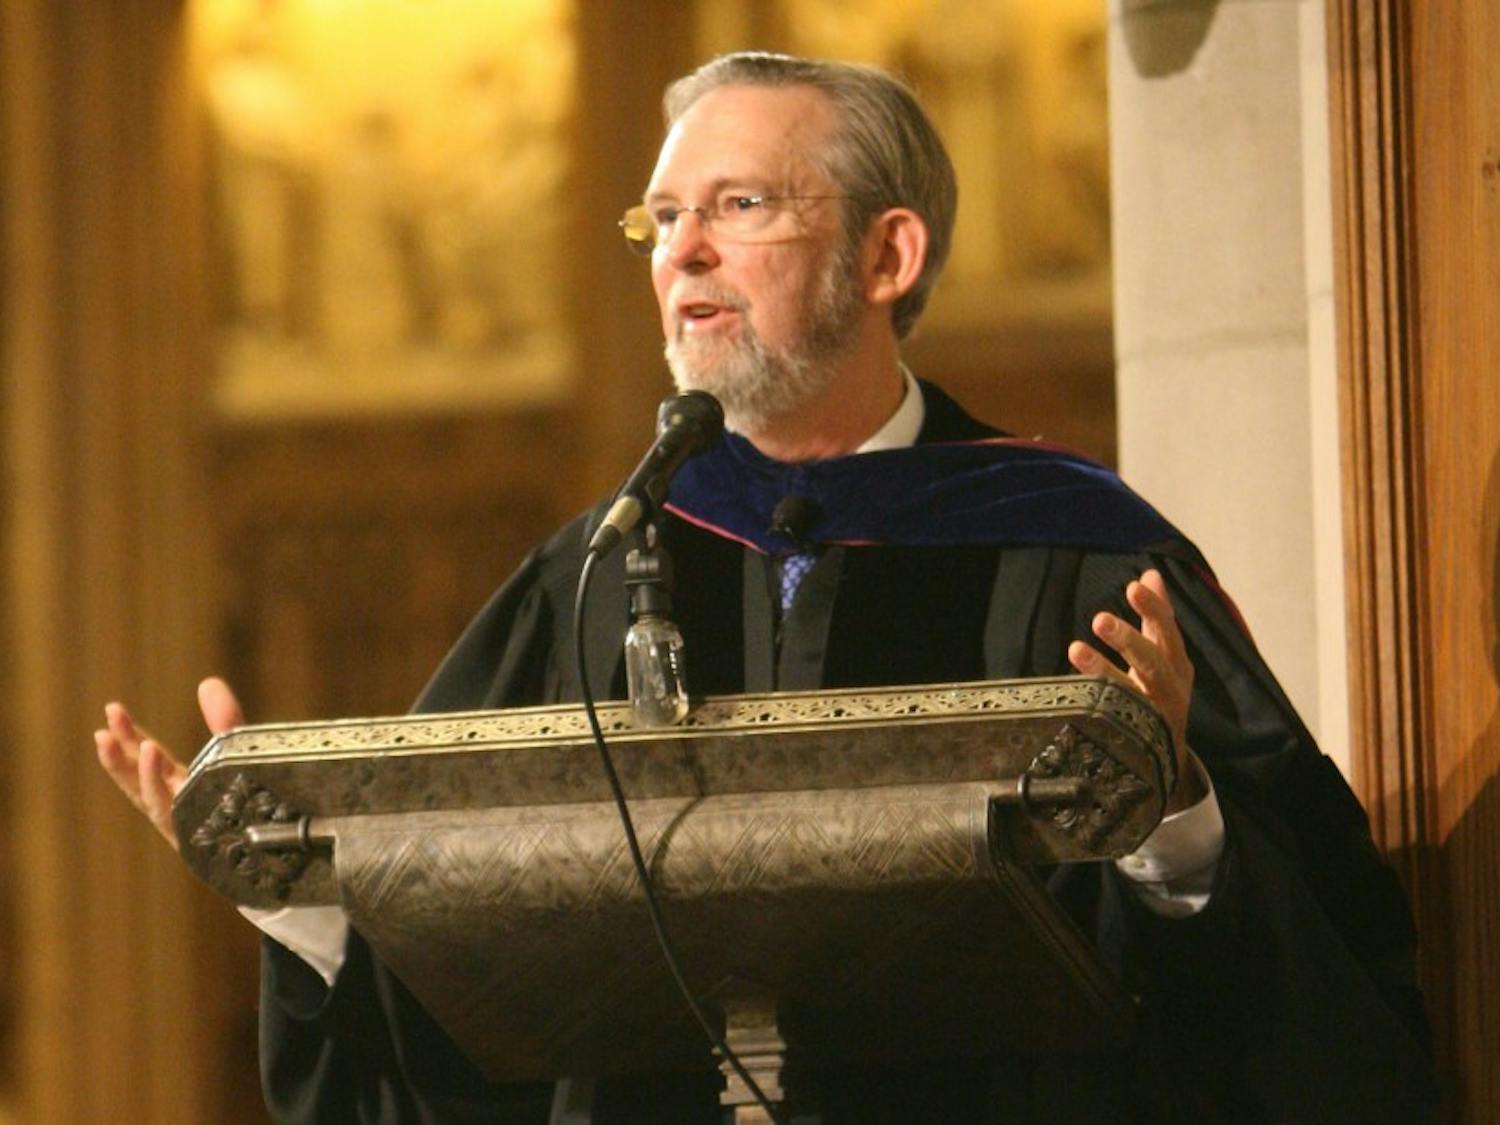 Richard Hays, pictured above, served Duke as a professor and scholar on the New Testament since 1991 before becoming Dean of the Divinity School.